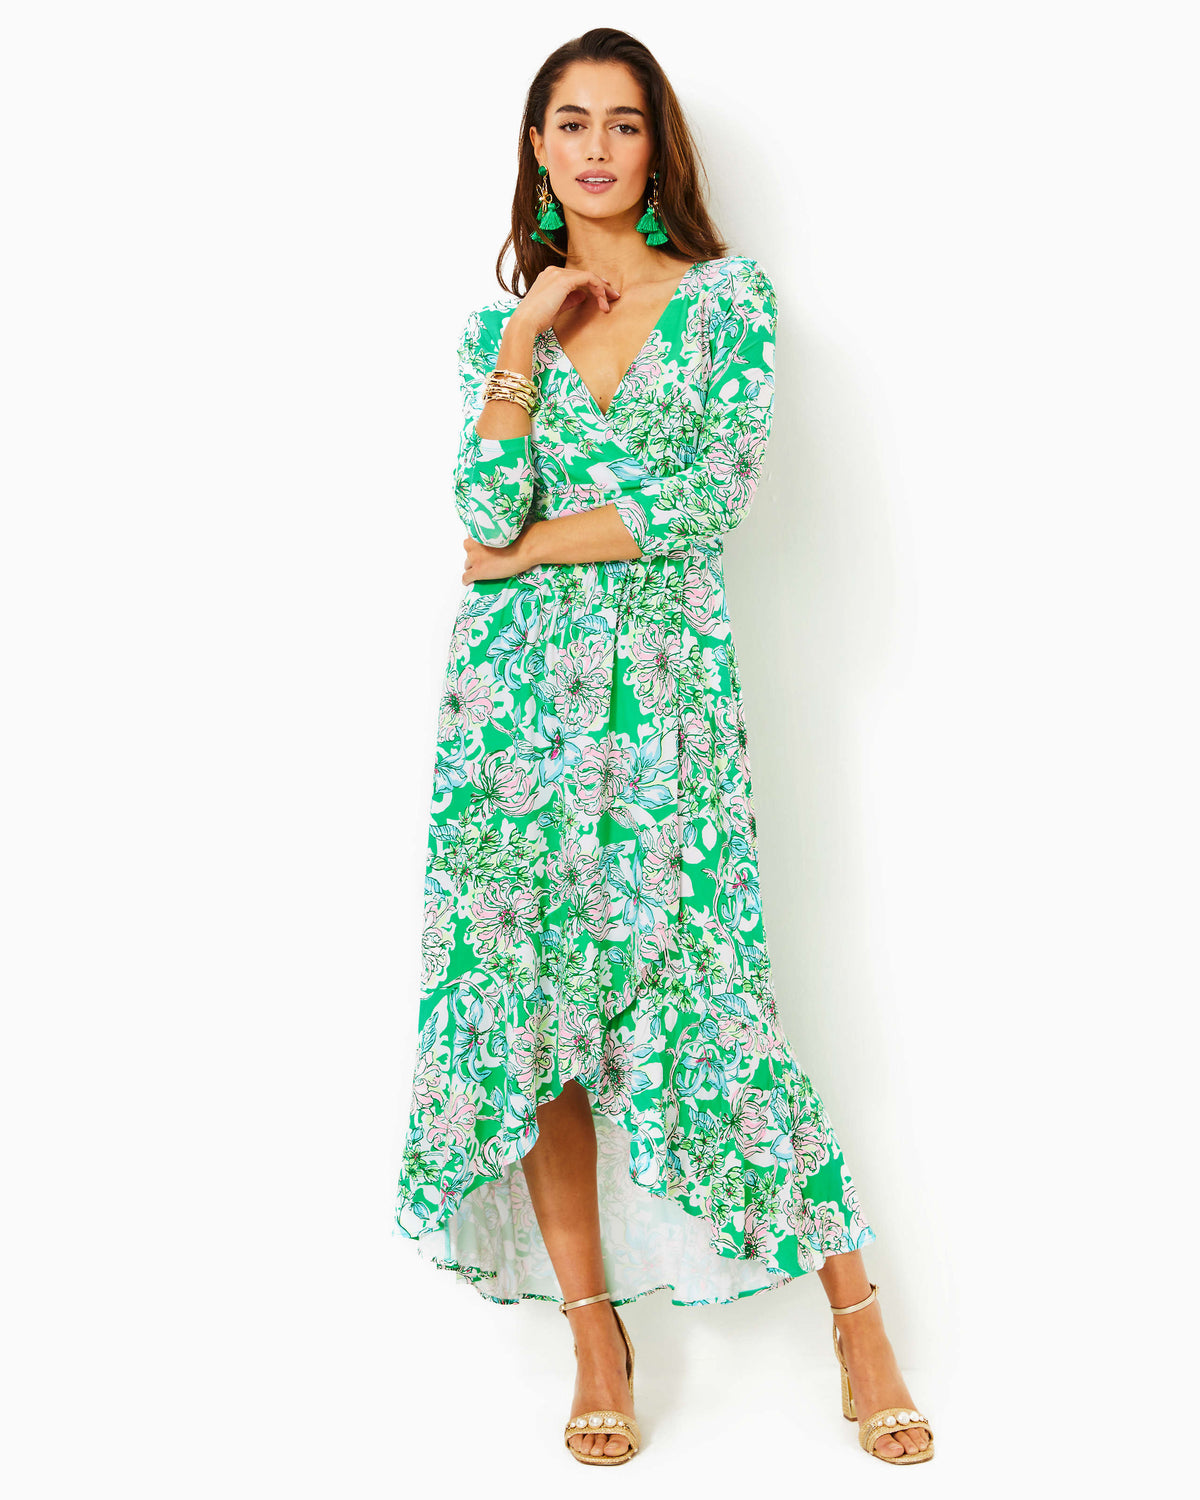 CODYLEE LONG-SLEEVE ROMPER - SOIREE ALL DAY - Lilly Pulitzer Store